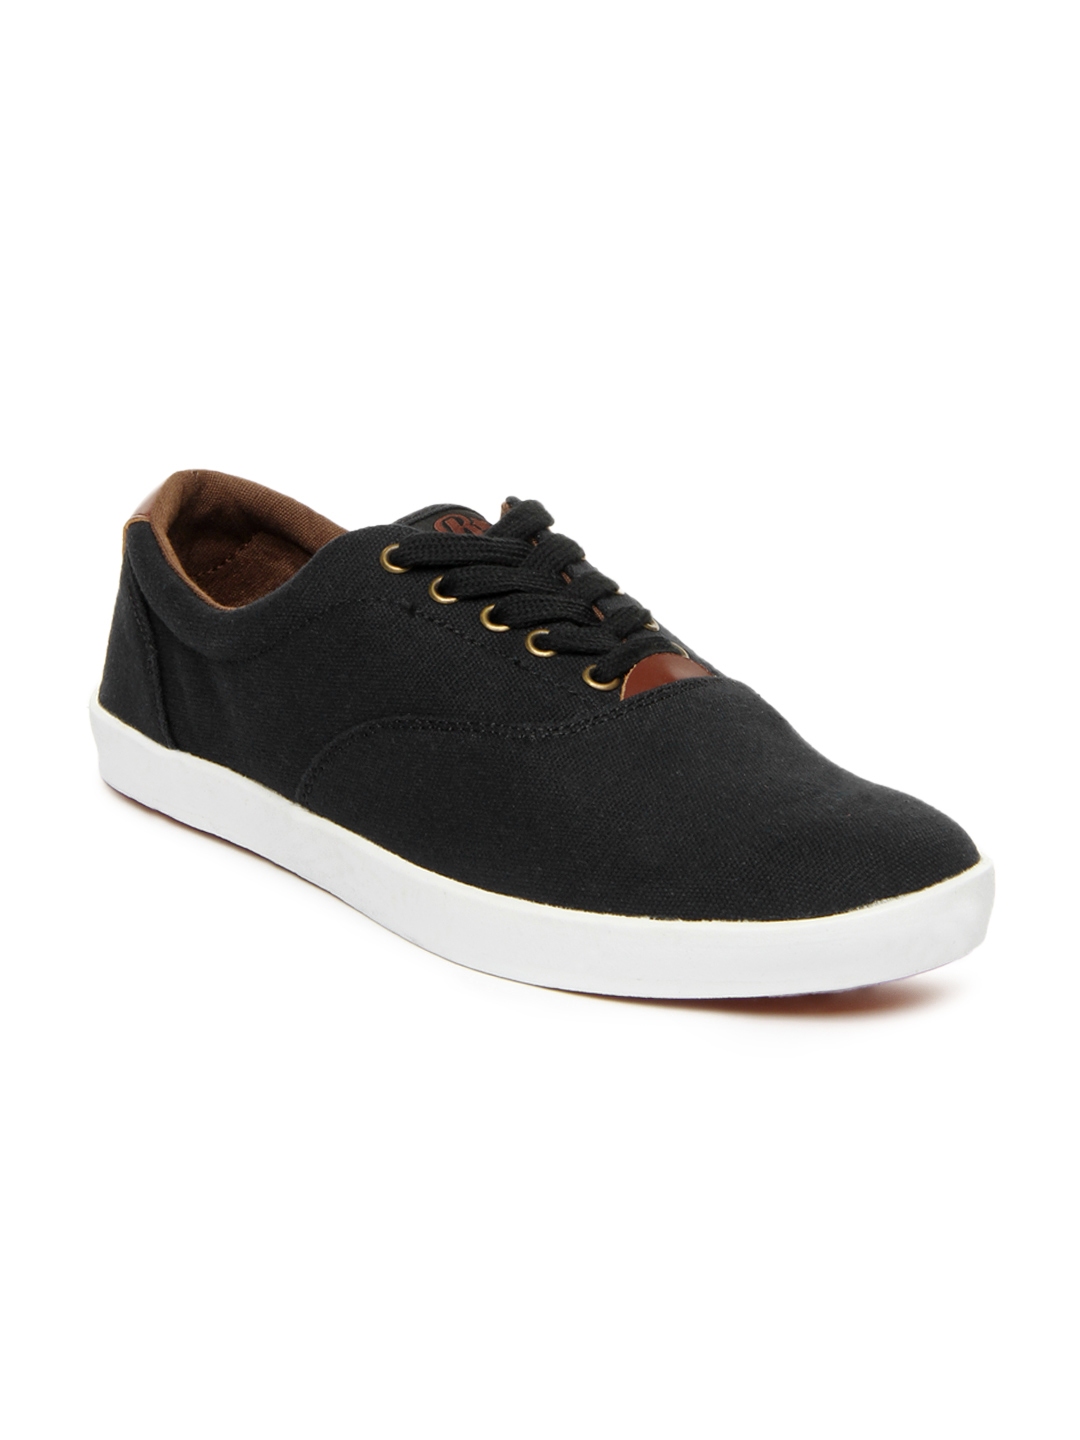 Buy Roadster Men Black Casual Shoes - Casual Shoes for Men 582059 | Myntra